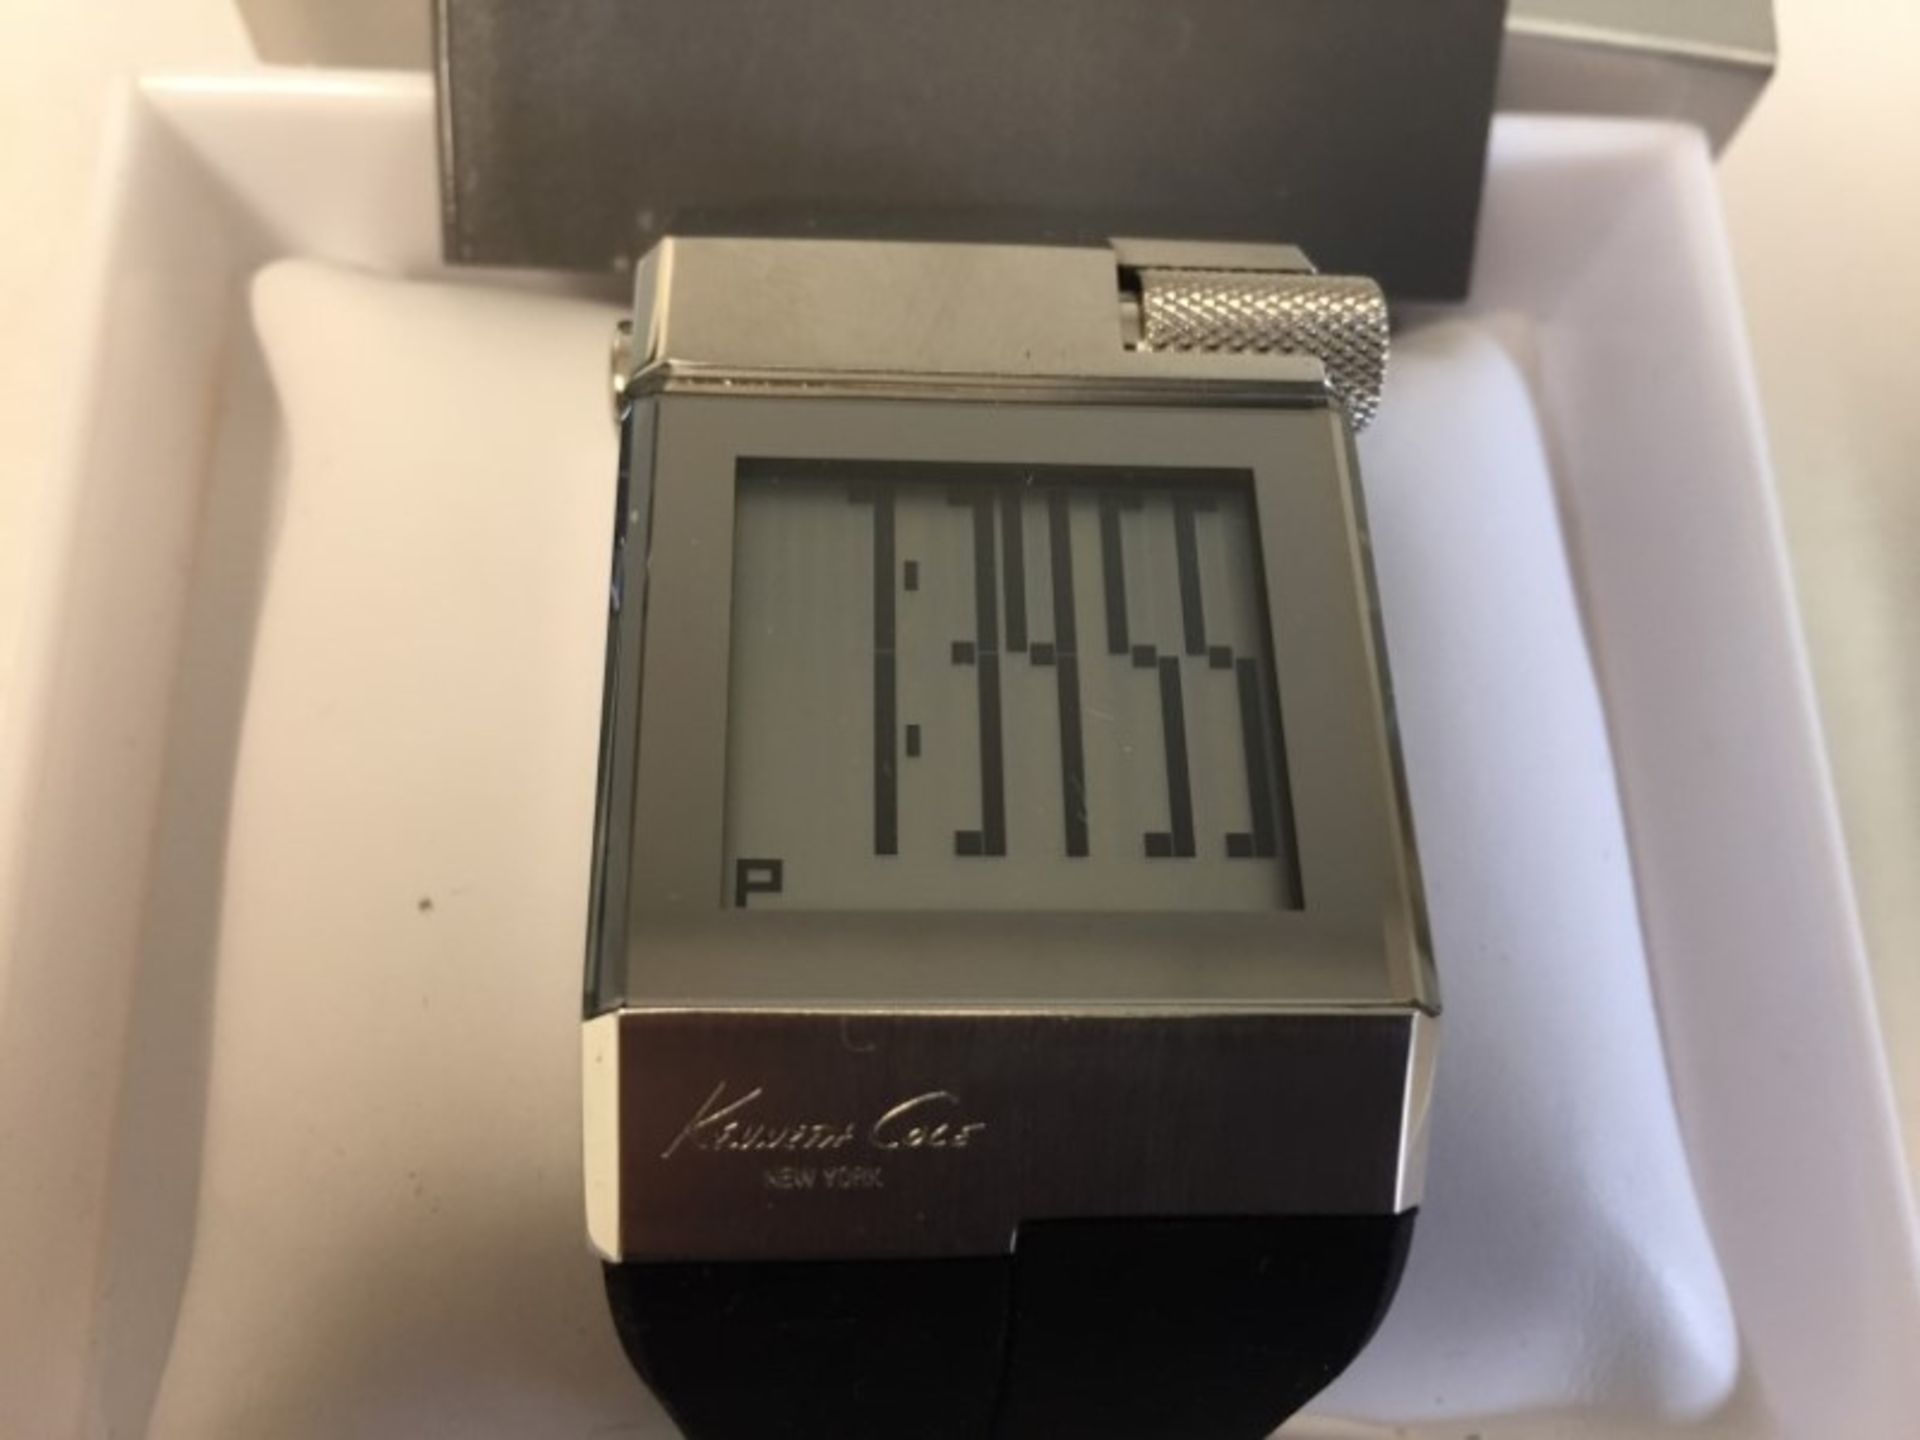 Kenneth Cole Reaction Wrist Watch - Image 2 of 2